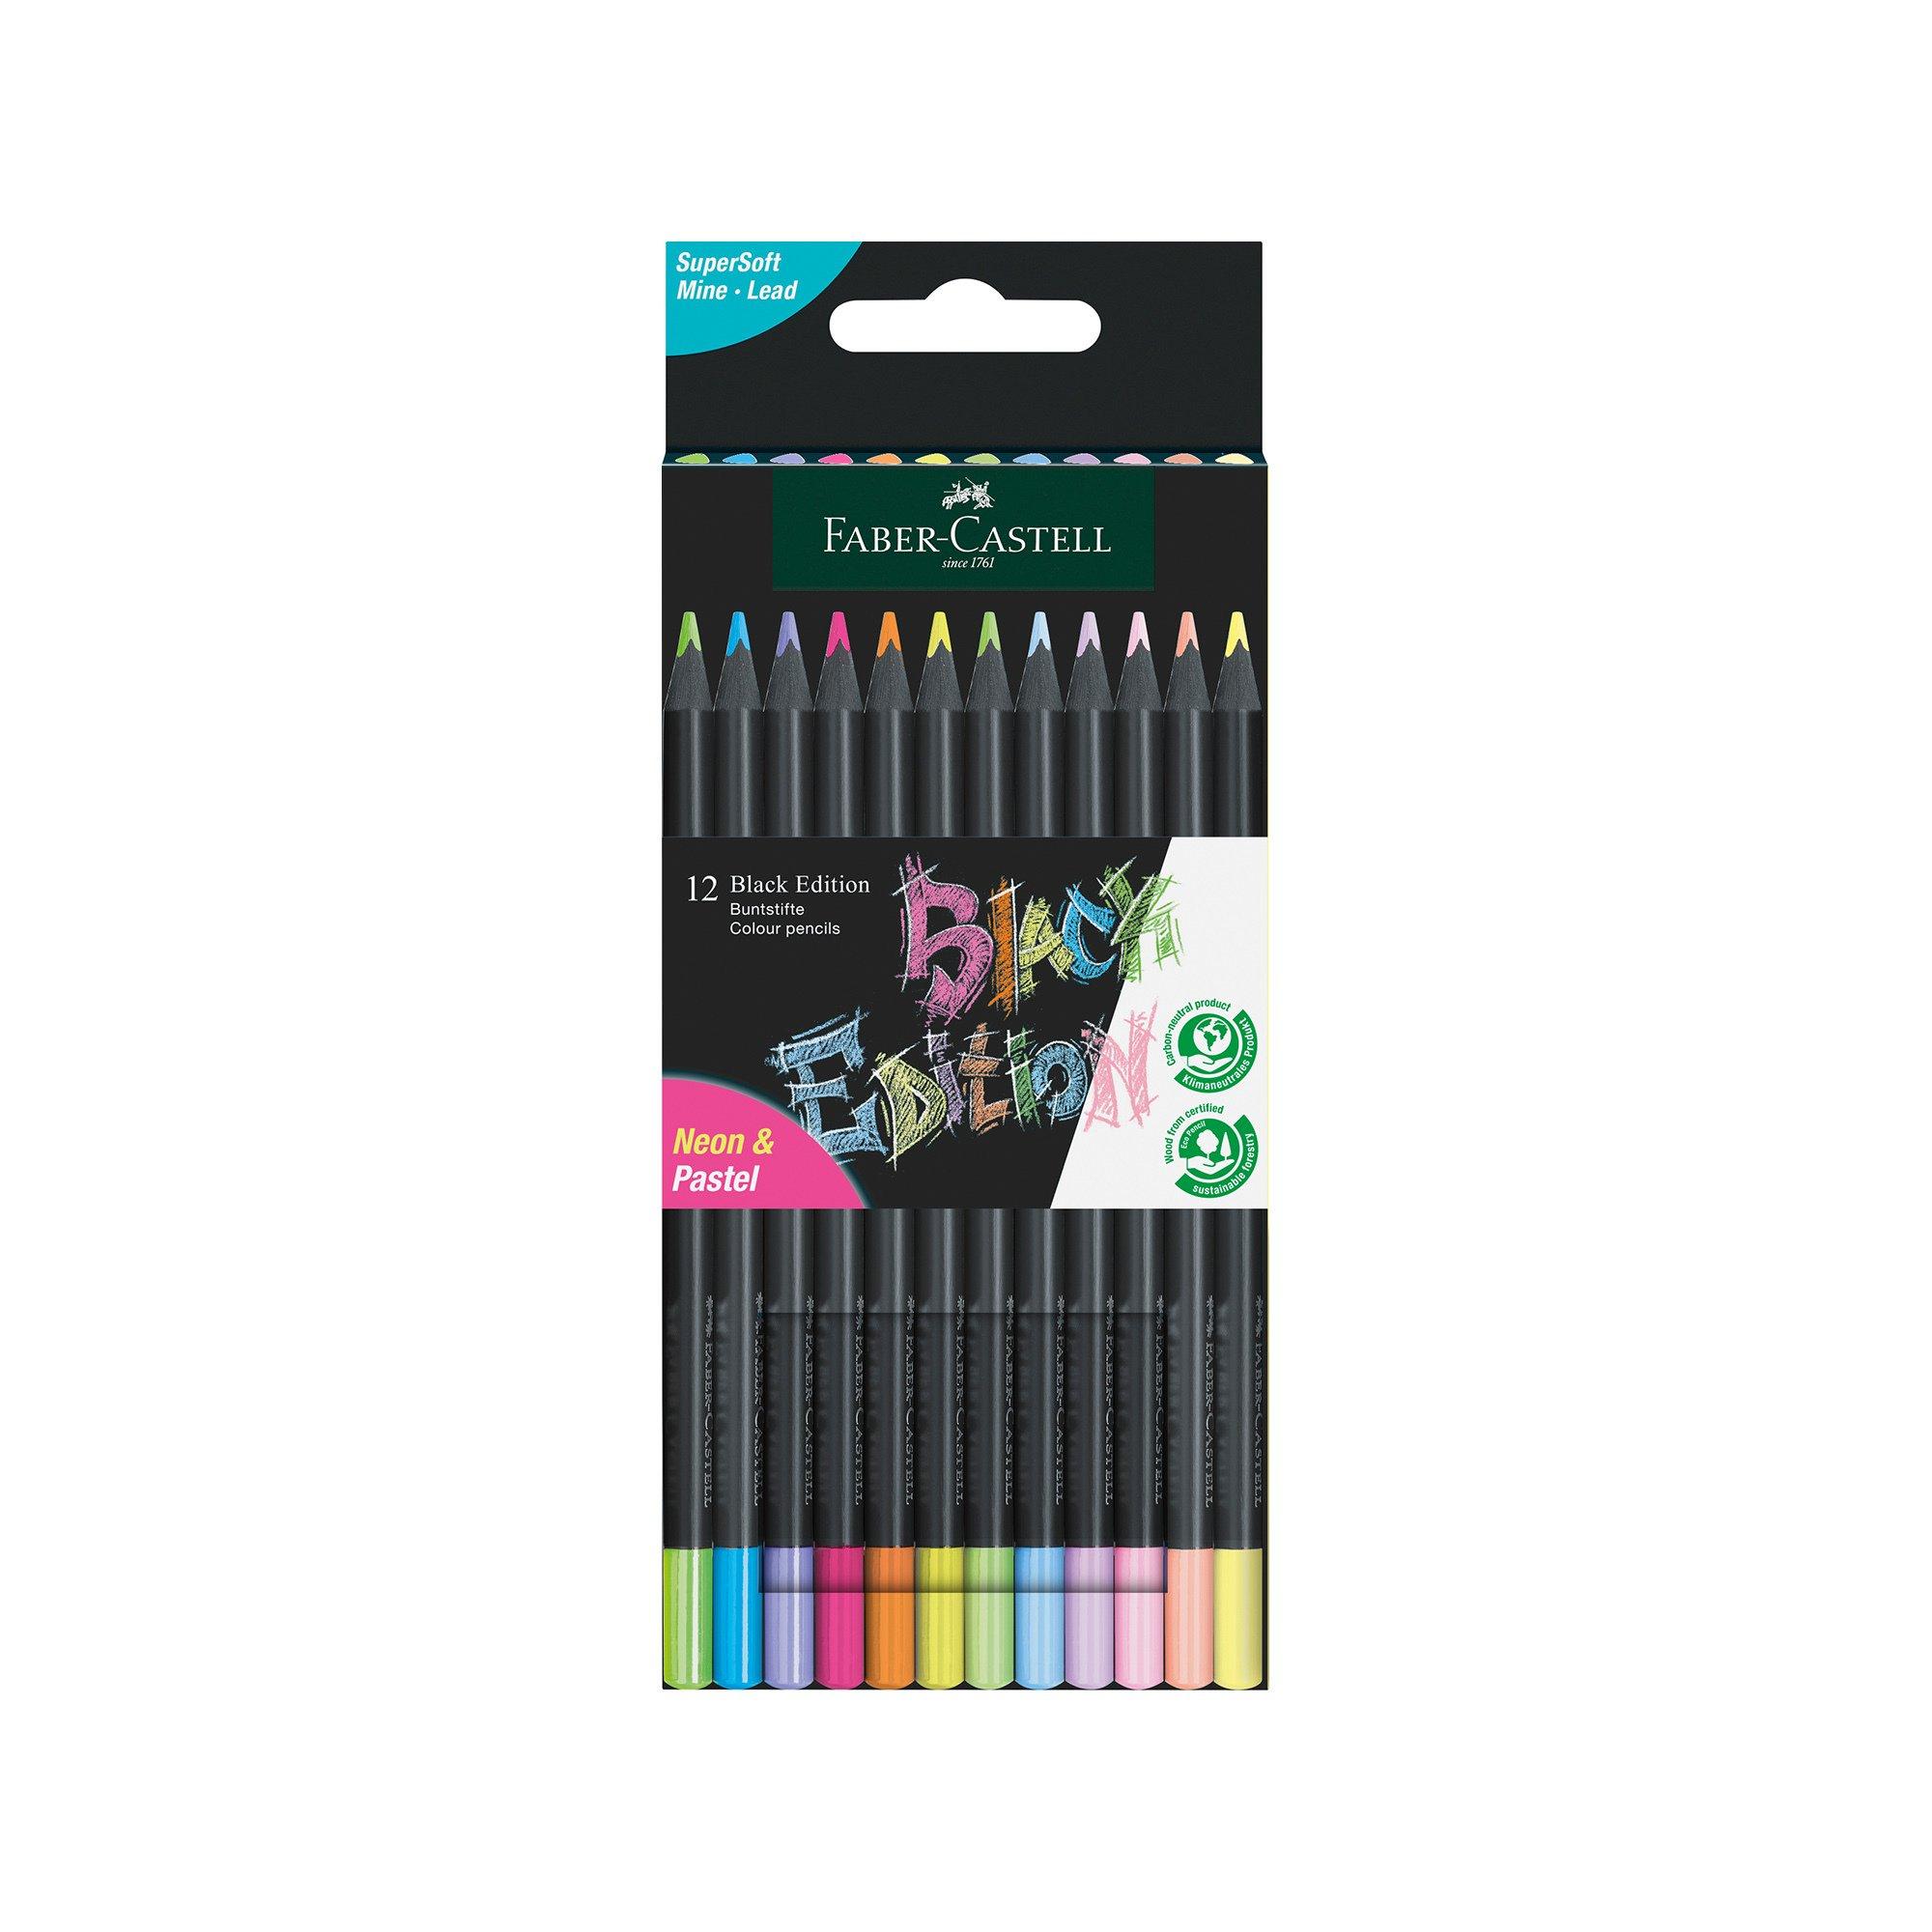 Faber-Castell Farbstifte Black Edition Neon + Pastell 